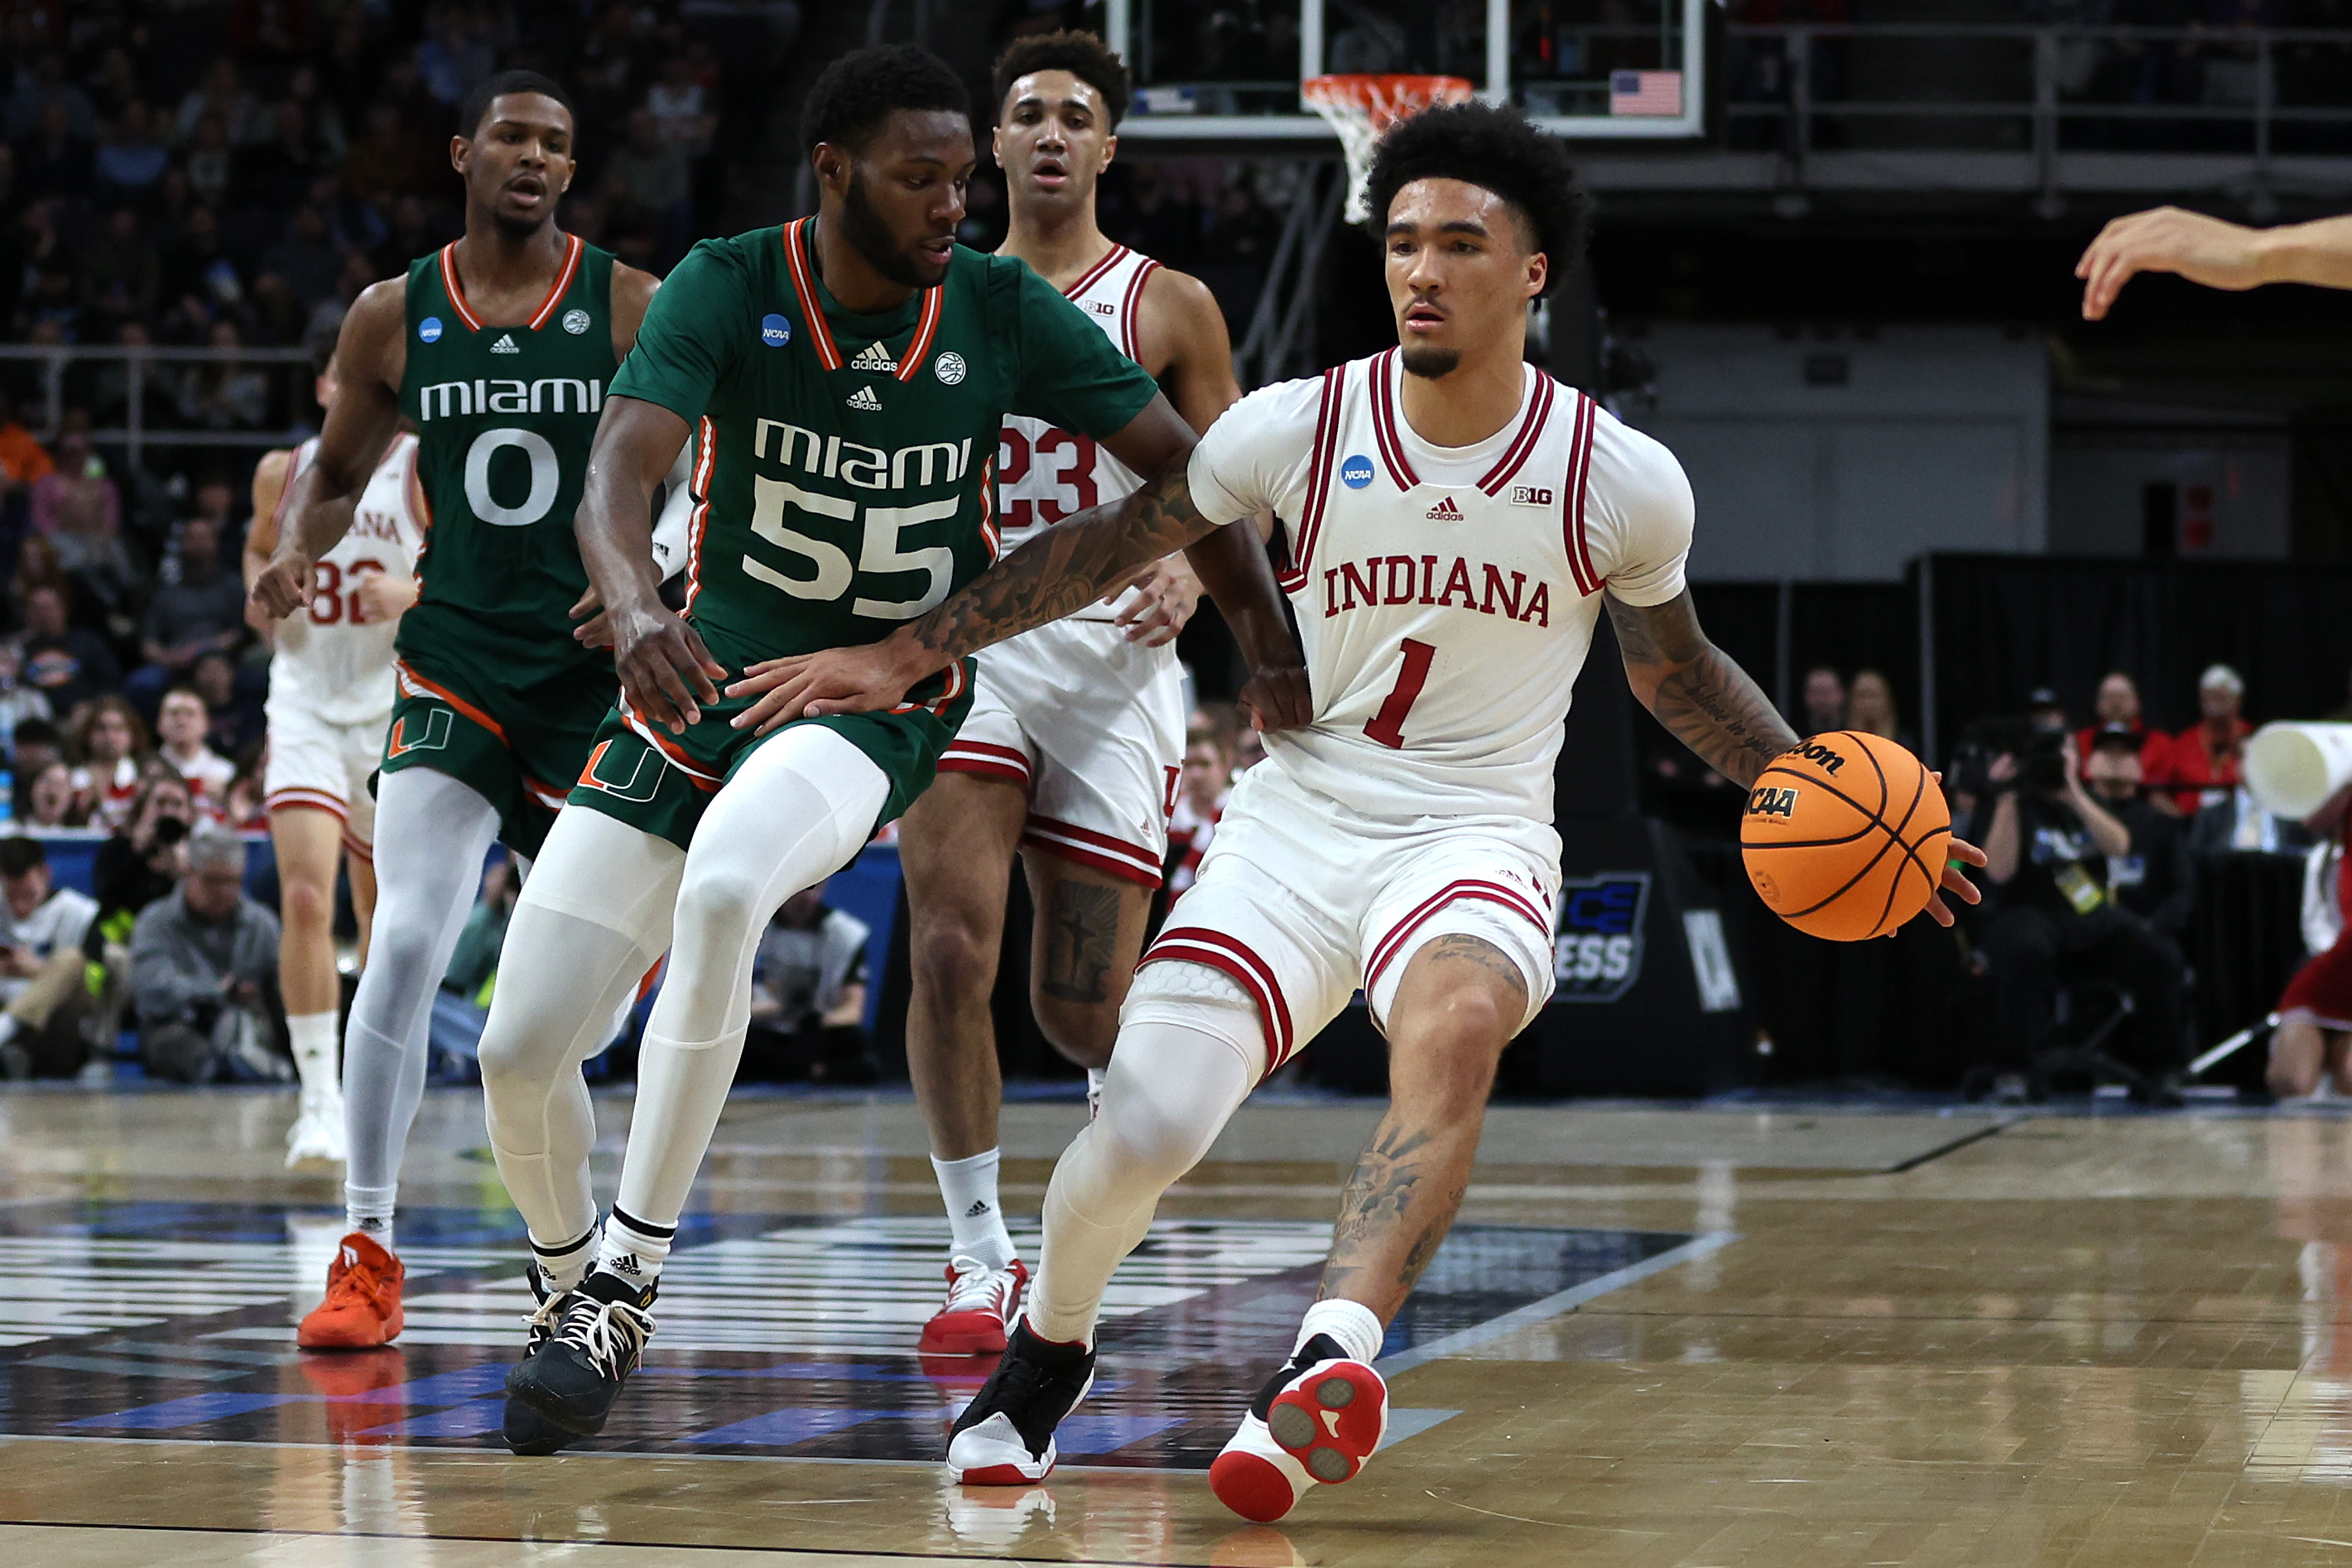 ALBANY, NEW YORK - MARCH 19: Jalen Hood-Schifino #1 of the Indiana Hoosiers handles the ball against Wooga Poplar #55 of the Miami Hurricanes in the first half during the second round of the NCAA Men’s Basketball Tournament at MVP Arena on March 19, 2023 in Albany, New York.